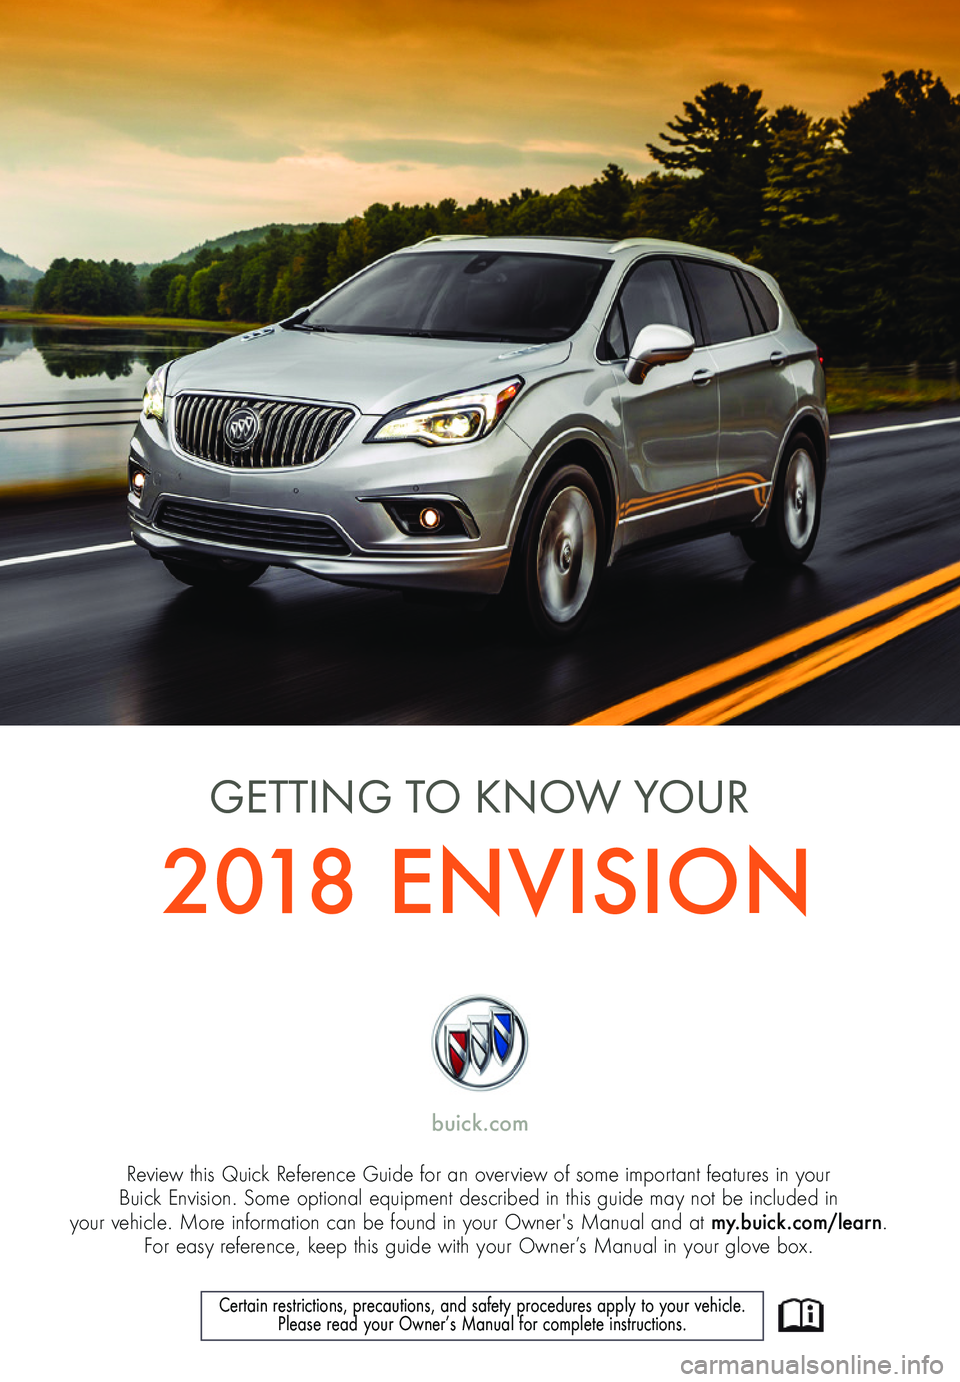 BUICK BENVISION 2018  Get To Know Guide 1
Review this Quick Reference Guide for an overview of some important features in your  Buick Envision. Some optional equipment described in this guide may not be included in  your vehicle. More infor